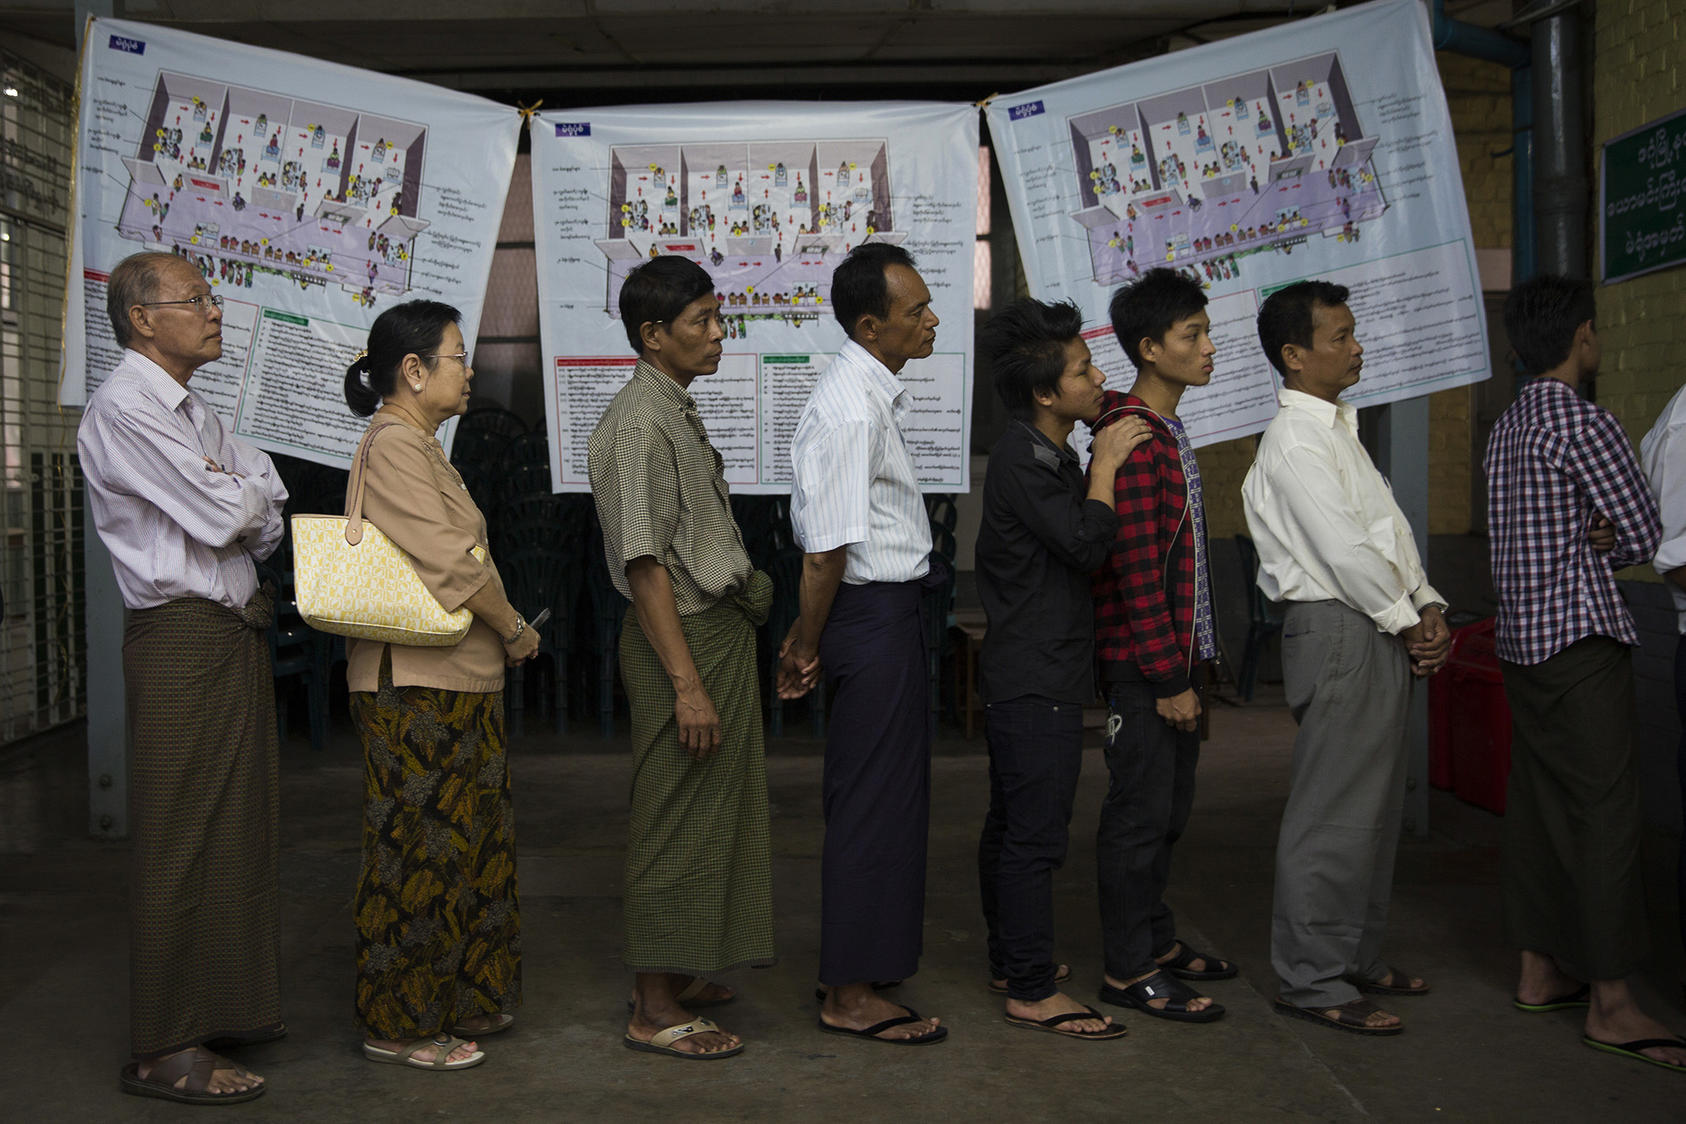 Voters line up at a polling station in Dagon High School in the Dagon township of Yangon, Myanmar, Nov. 8, 2015. (Adam Dean/The New York Times)